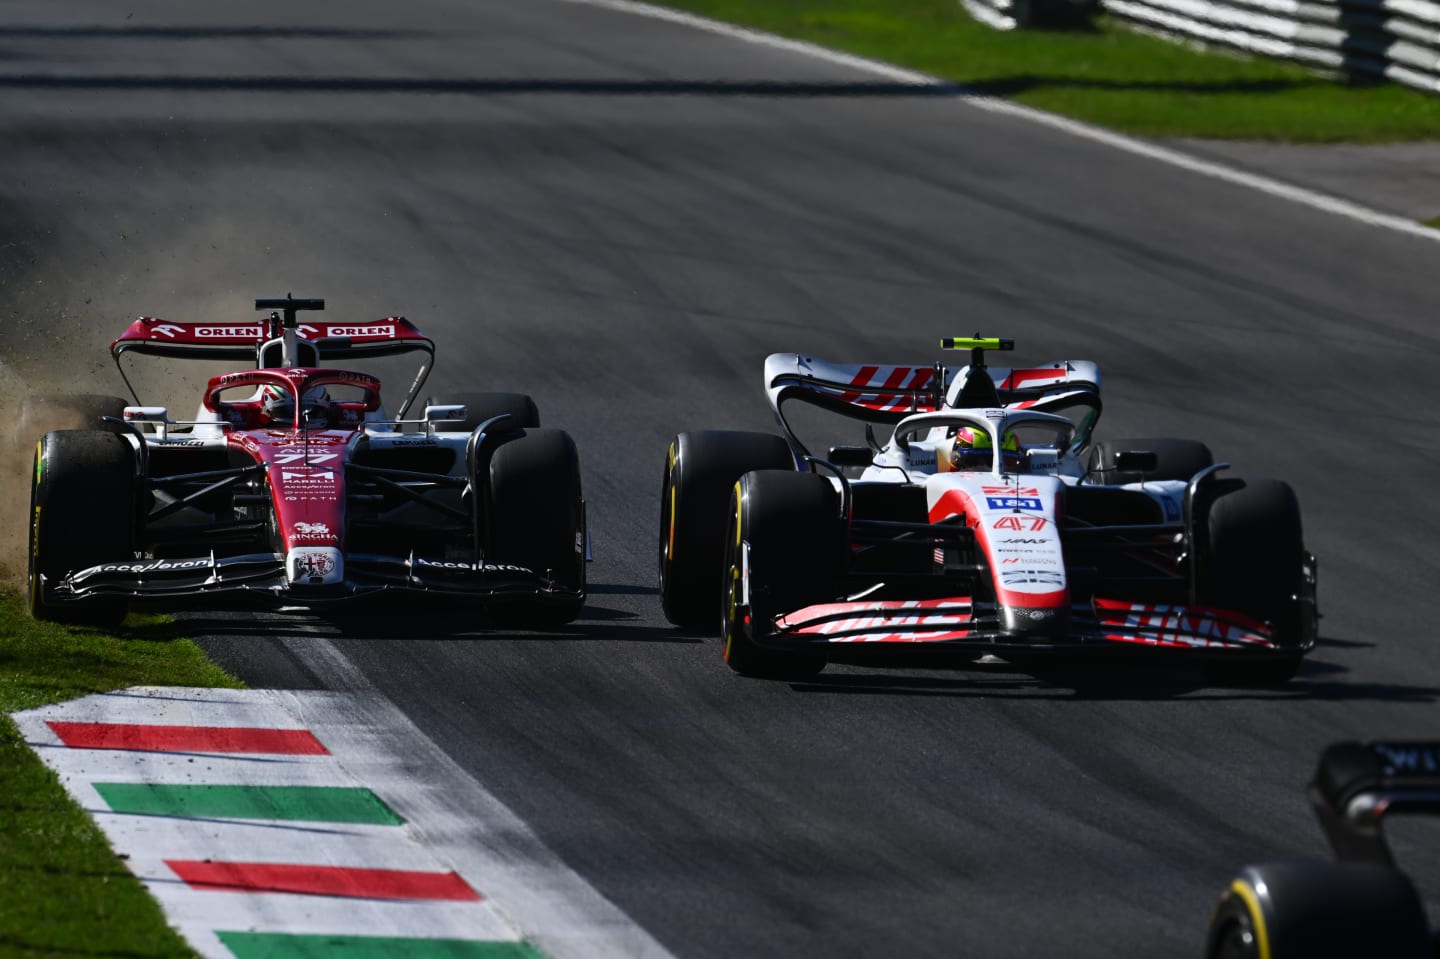 MONZA, ITALY - SEPTEMBER 11: Valtteri Bottas of Finland driving the (77) Alfa Romeo F1 C42 Ferrari runs wide as he and Mick Schumacher of Germany and Haas F1 battle for track position during the F1 Grand Prix of Italy at Autodromo Nazionale Monza on September 11, 2022 in Monza, Italy. (Photo by Clive Mason/Getty Images)